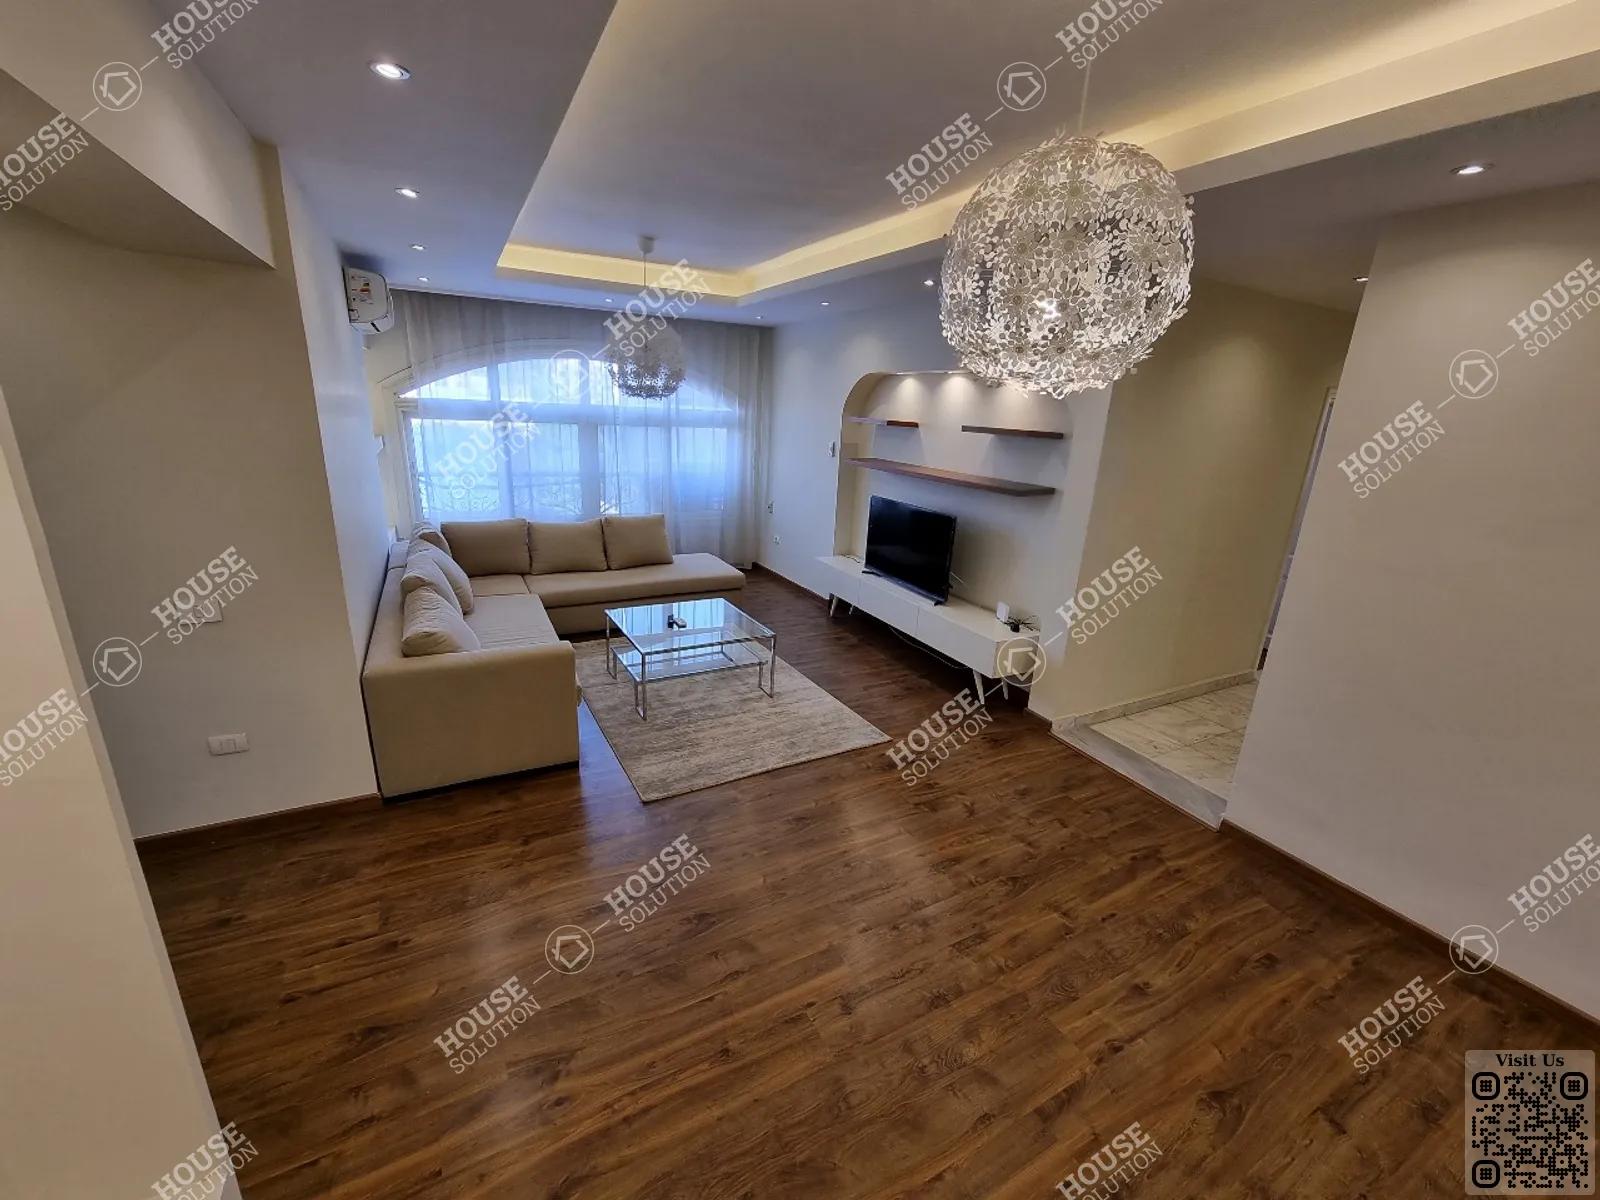 LIVING AREA  @ Apartments For Rent In Maadi Maadi Sarayat Area: 250 m² consists of 4 Bedrooms 3 Bathrooms Modern furnished 5 stars #5922-2